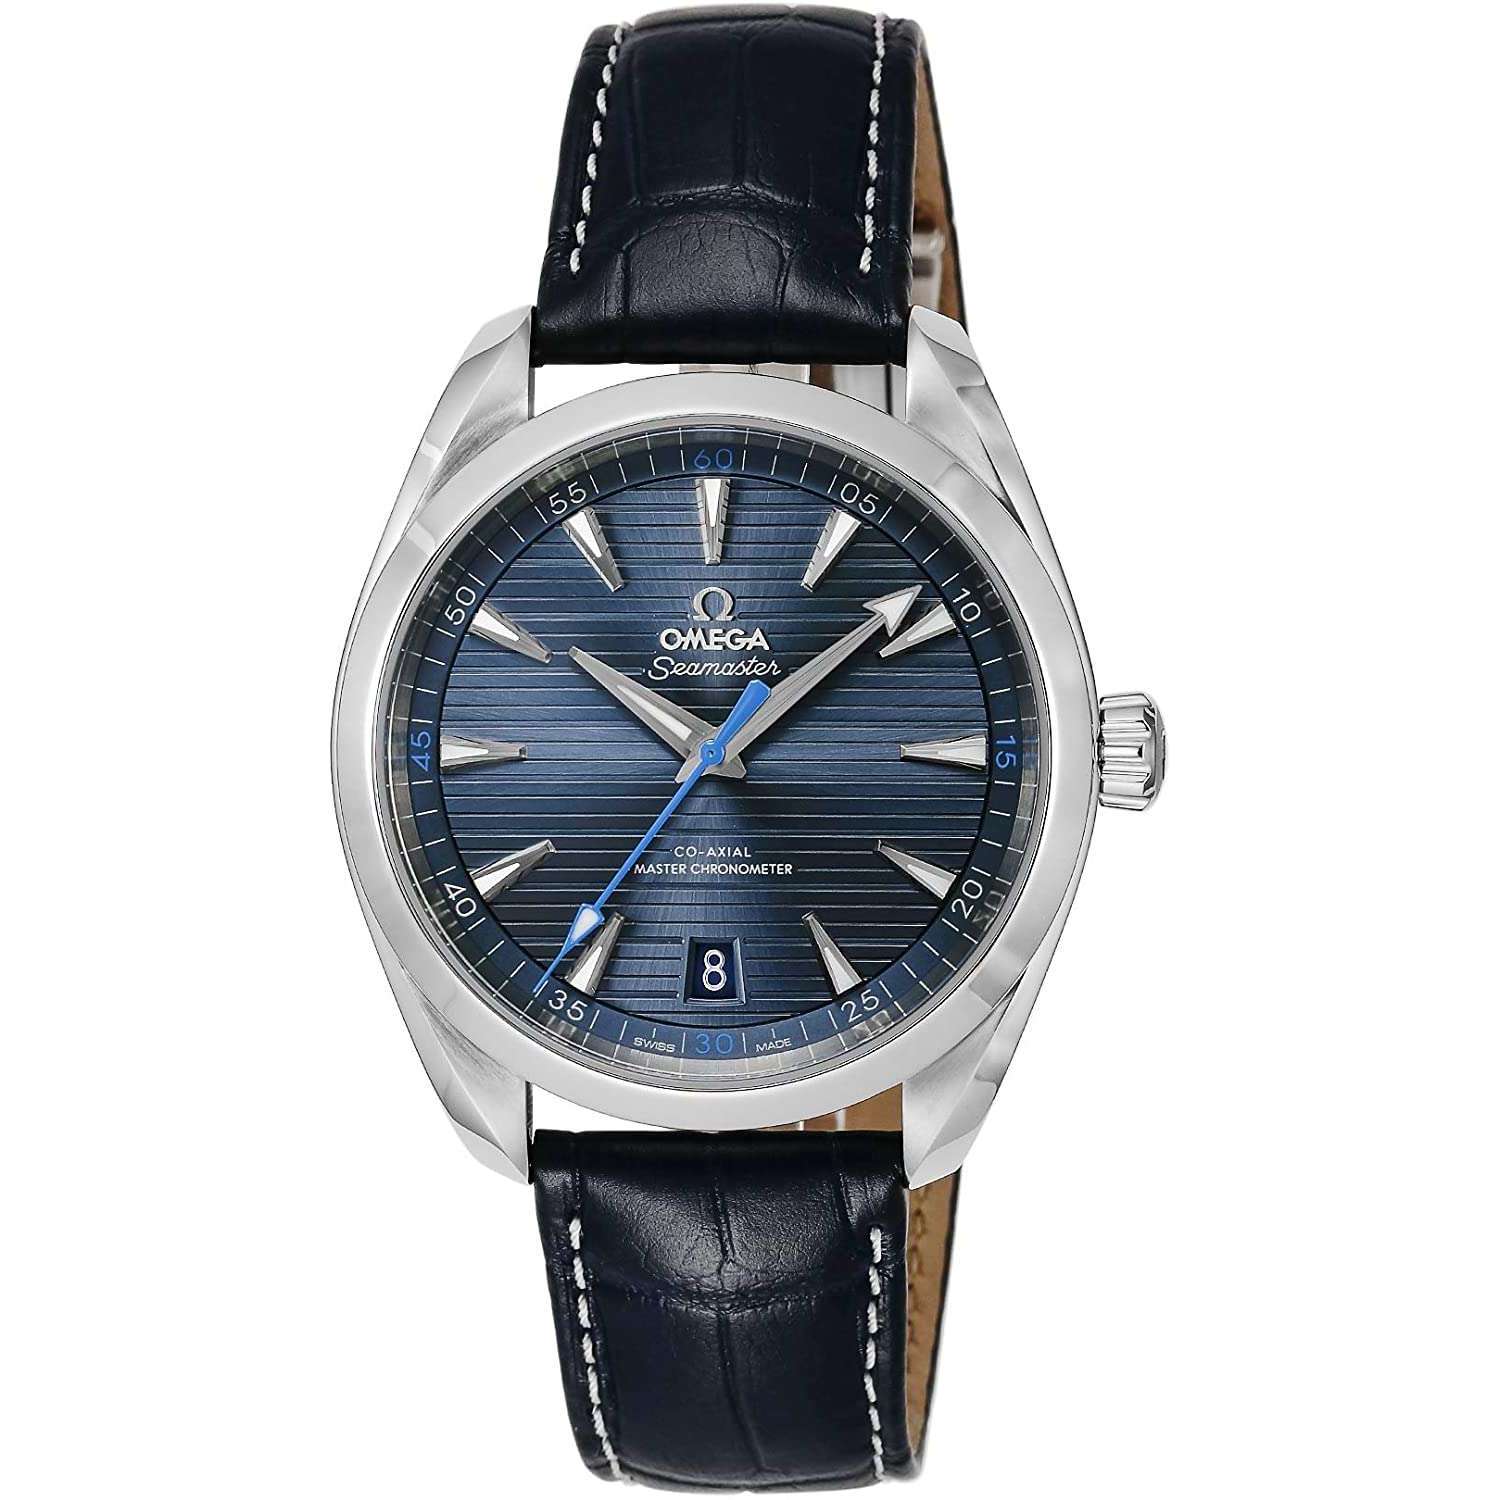 OMEGA SEAMASTER CO-AXIAL MASTER CHRONOMETER 40 MM MEN WATCH 220.13.41.21.03.002 - ROOK JAPAN